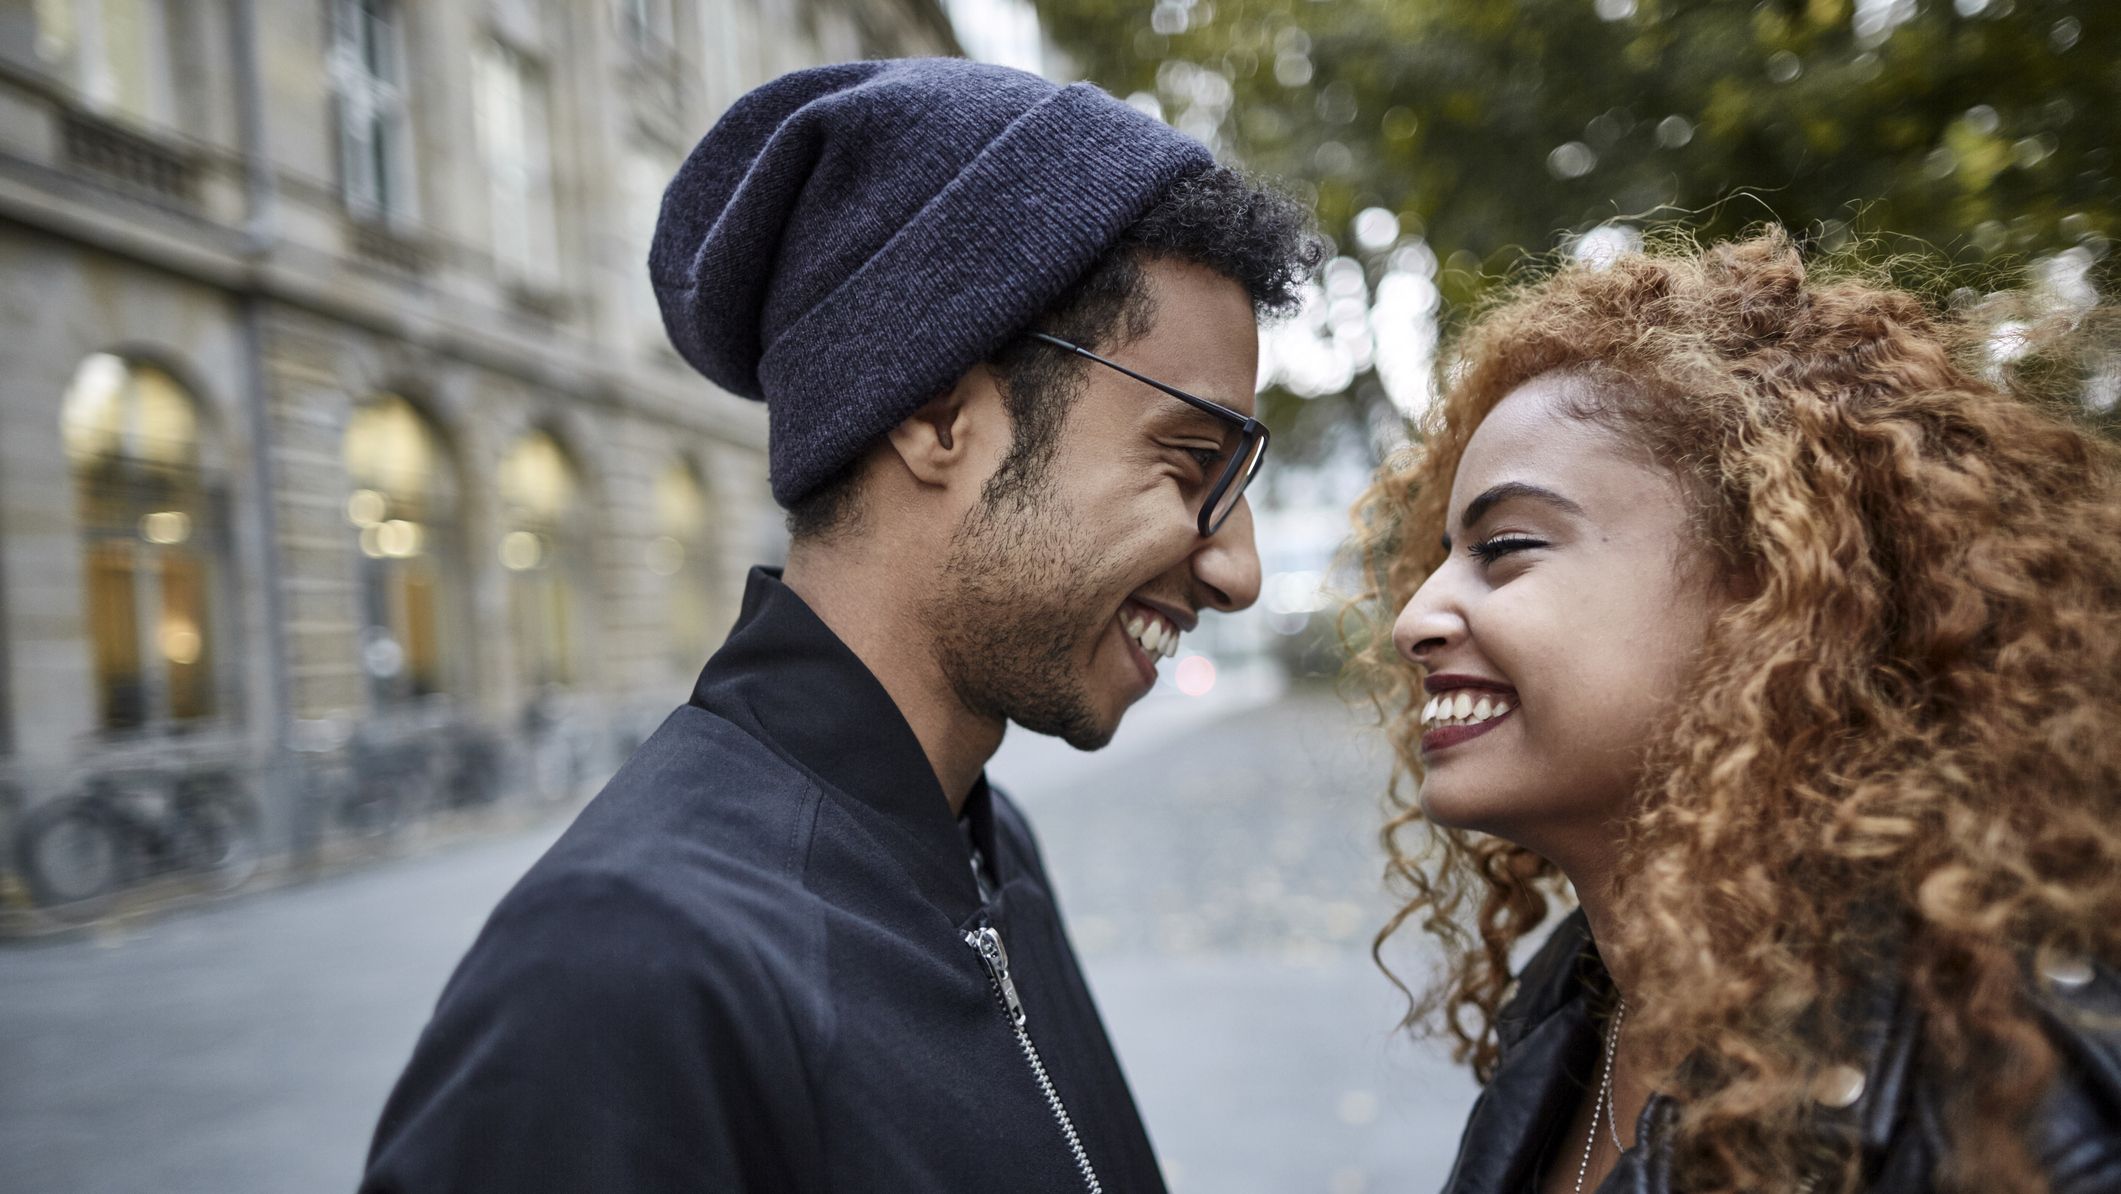 Am I In Love? 16 Signs You're In Love, Per Relationship Experts